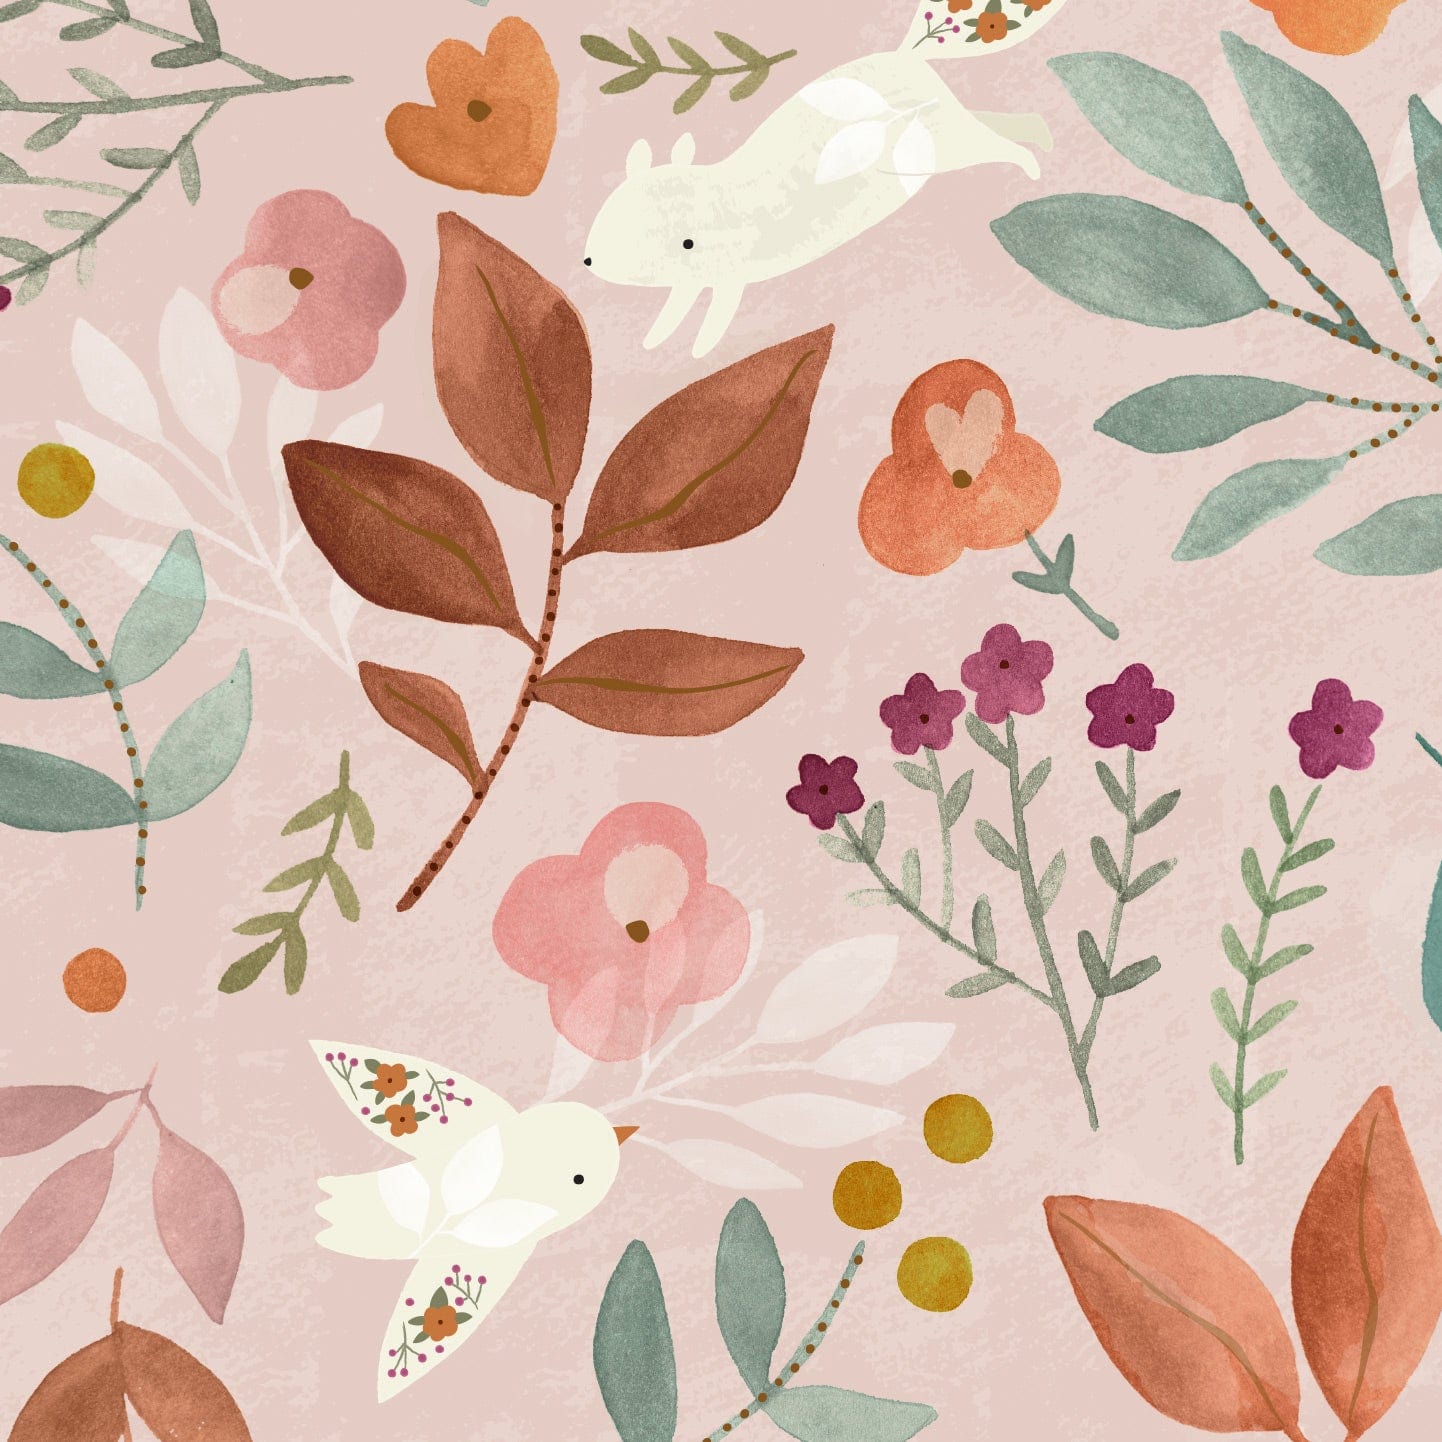 Wallpaper sample of vintage pink background with cream birds and squirrels with floral detailing. vintage pink and orange flowers with green leaves.